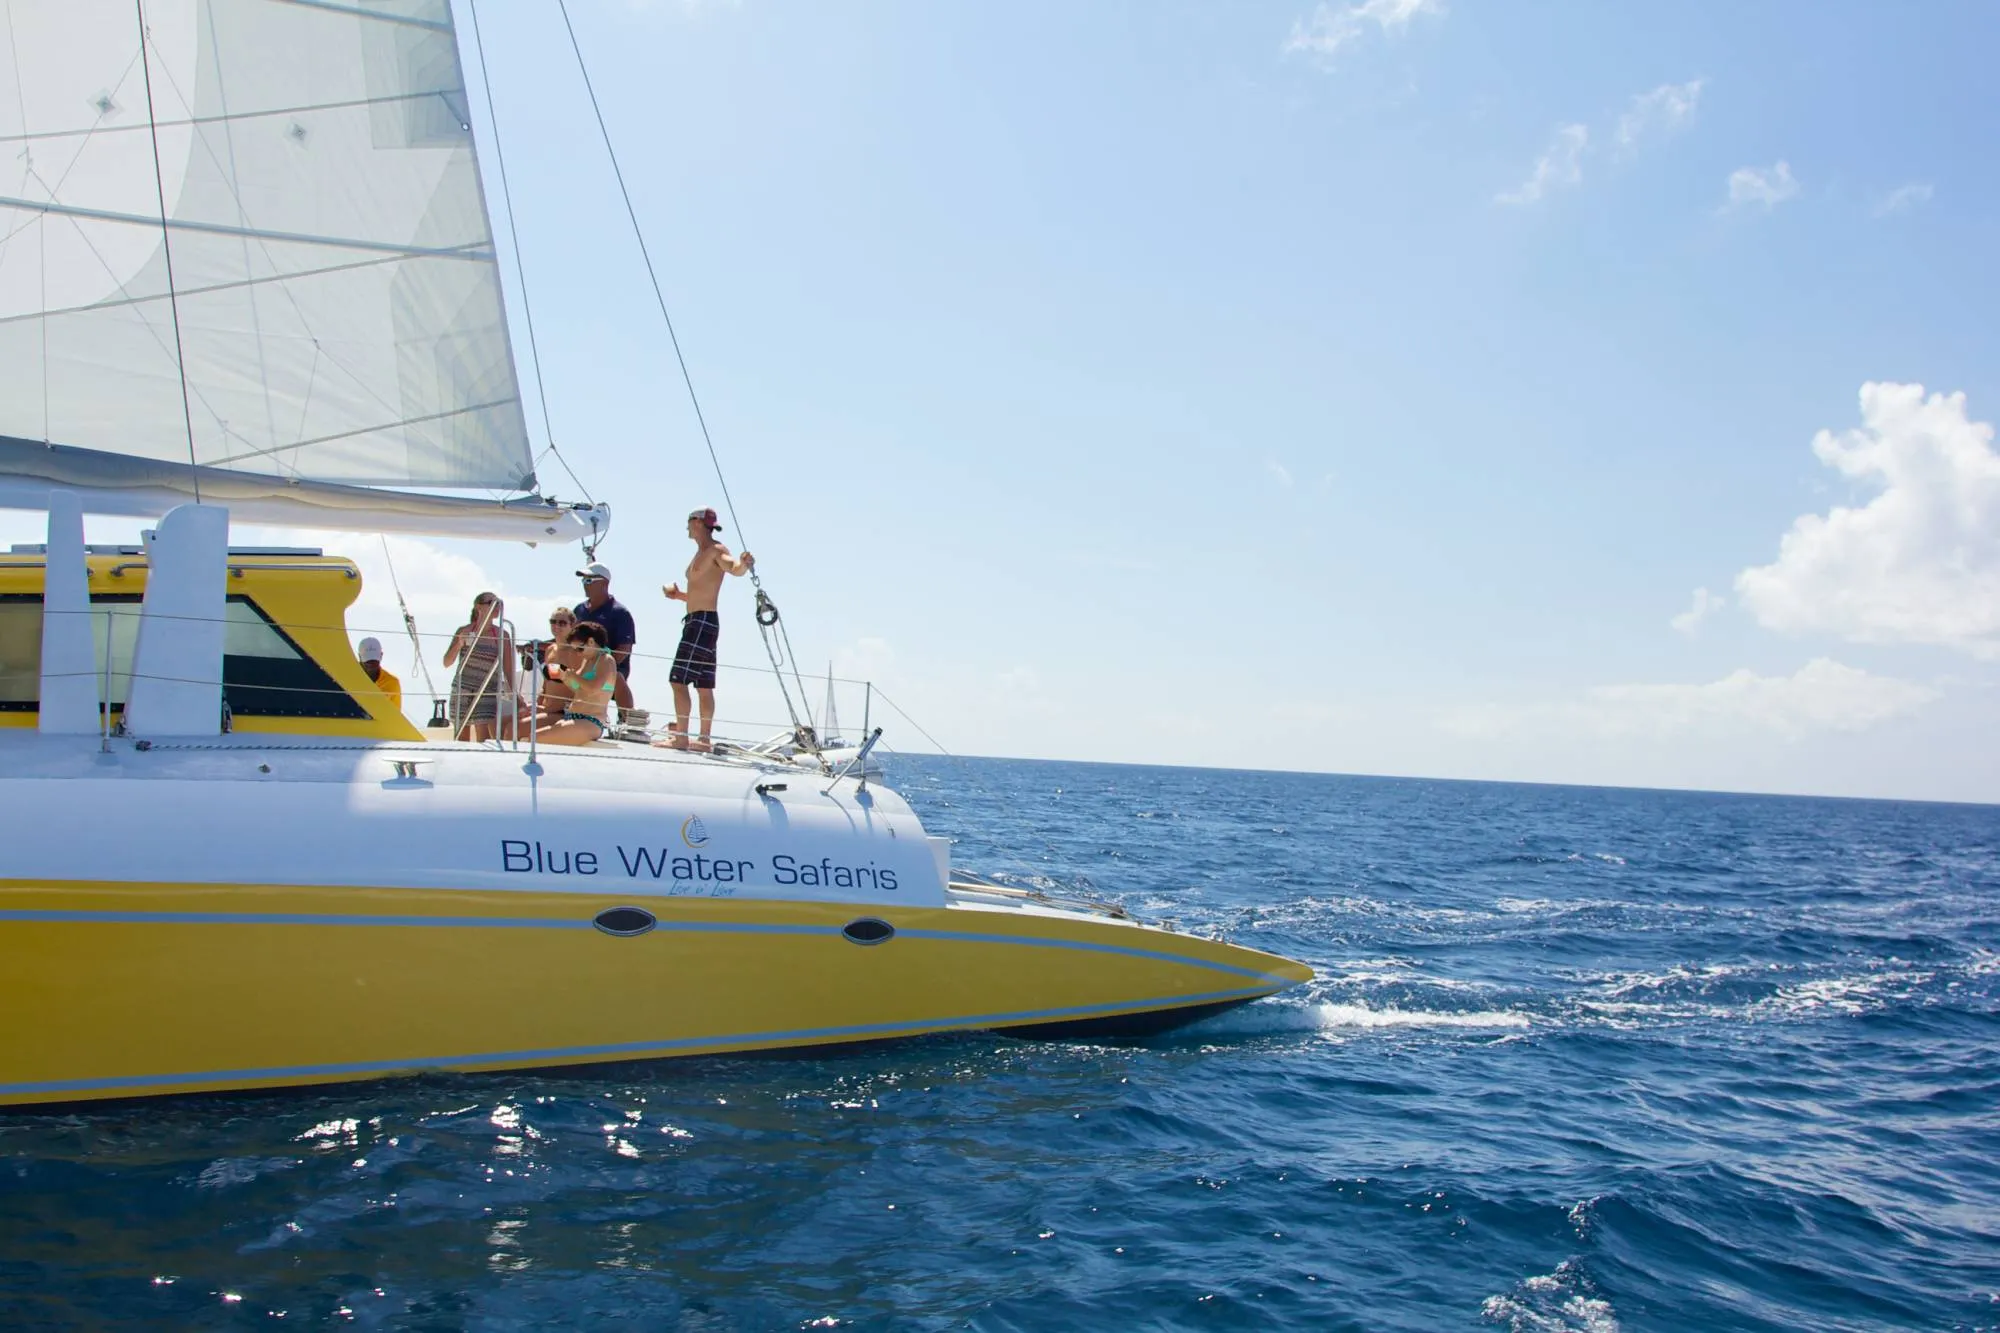 Blue Water Safaris in Saint Kitts and Nevis, Caribbean | Yachting - Rated 0.8